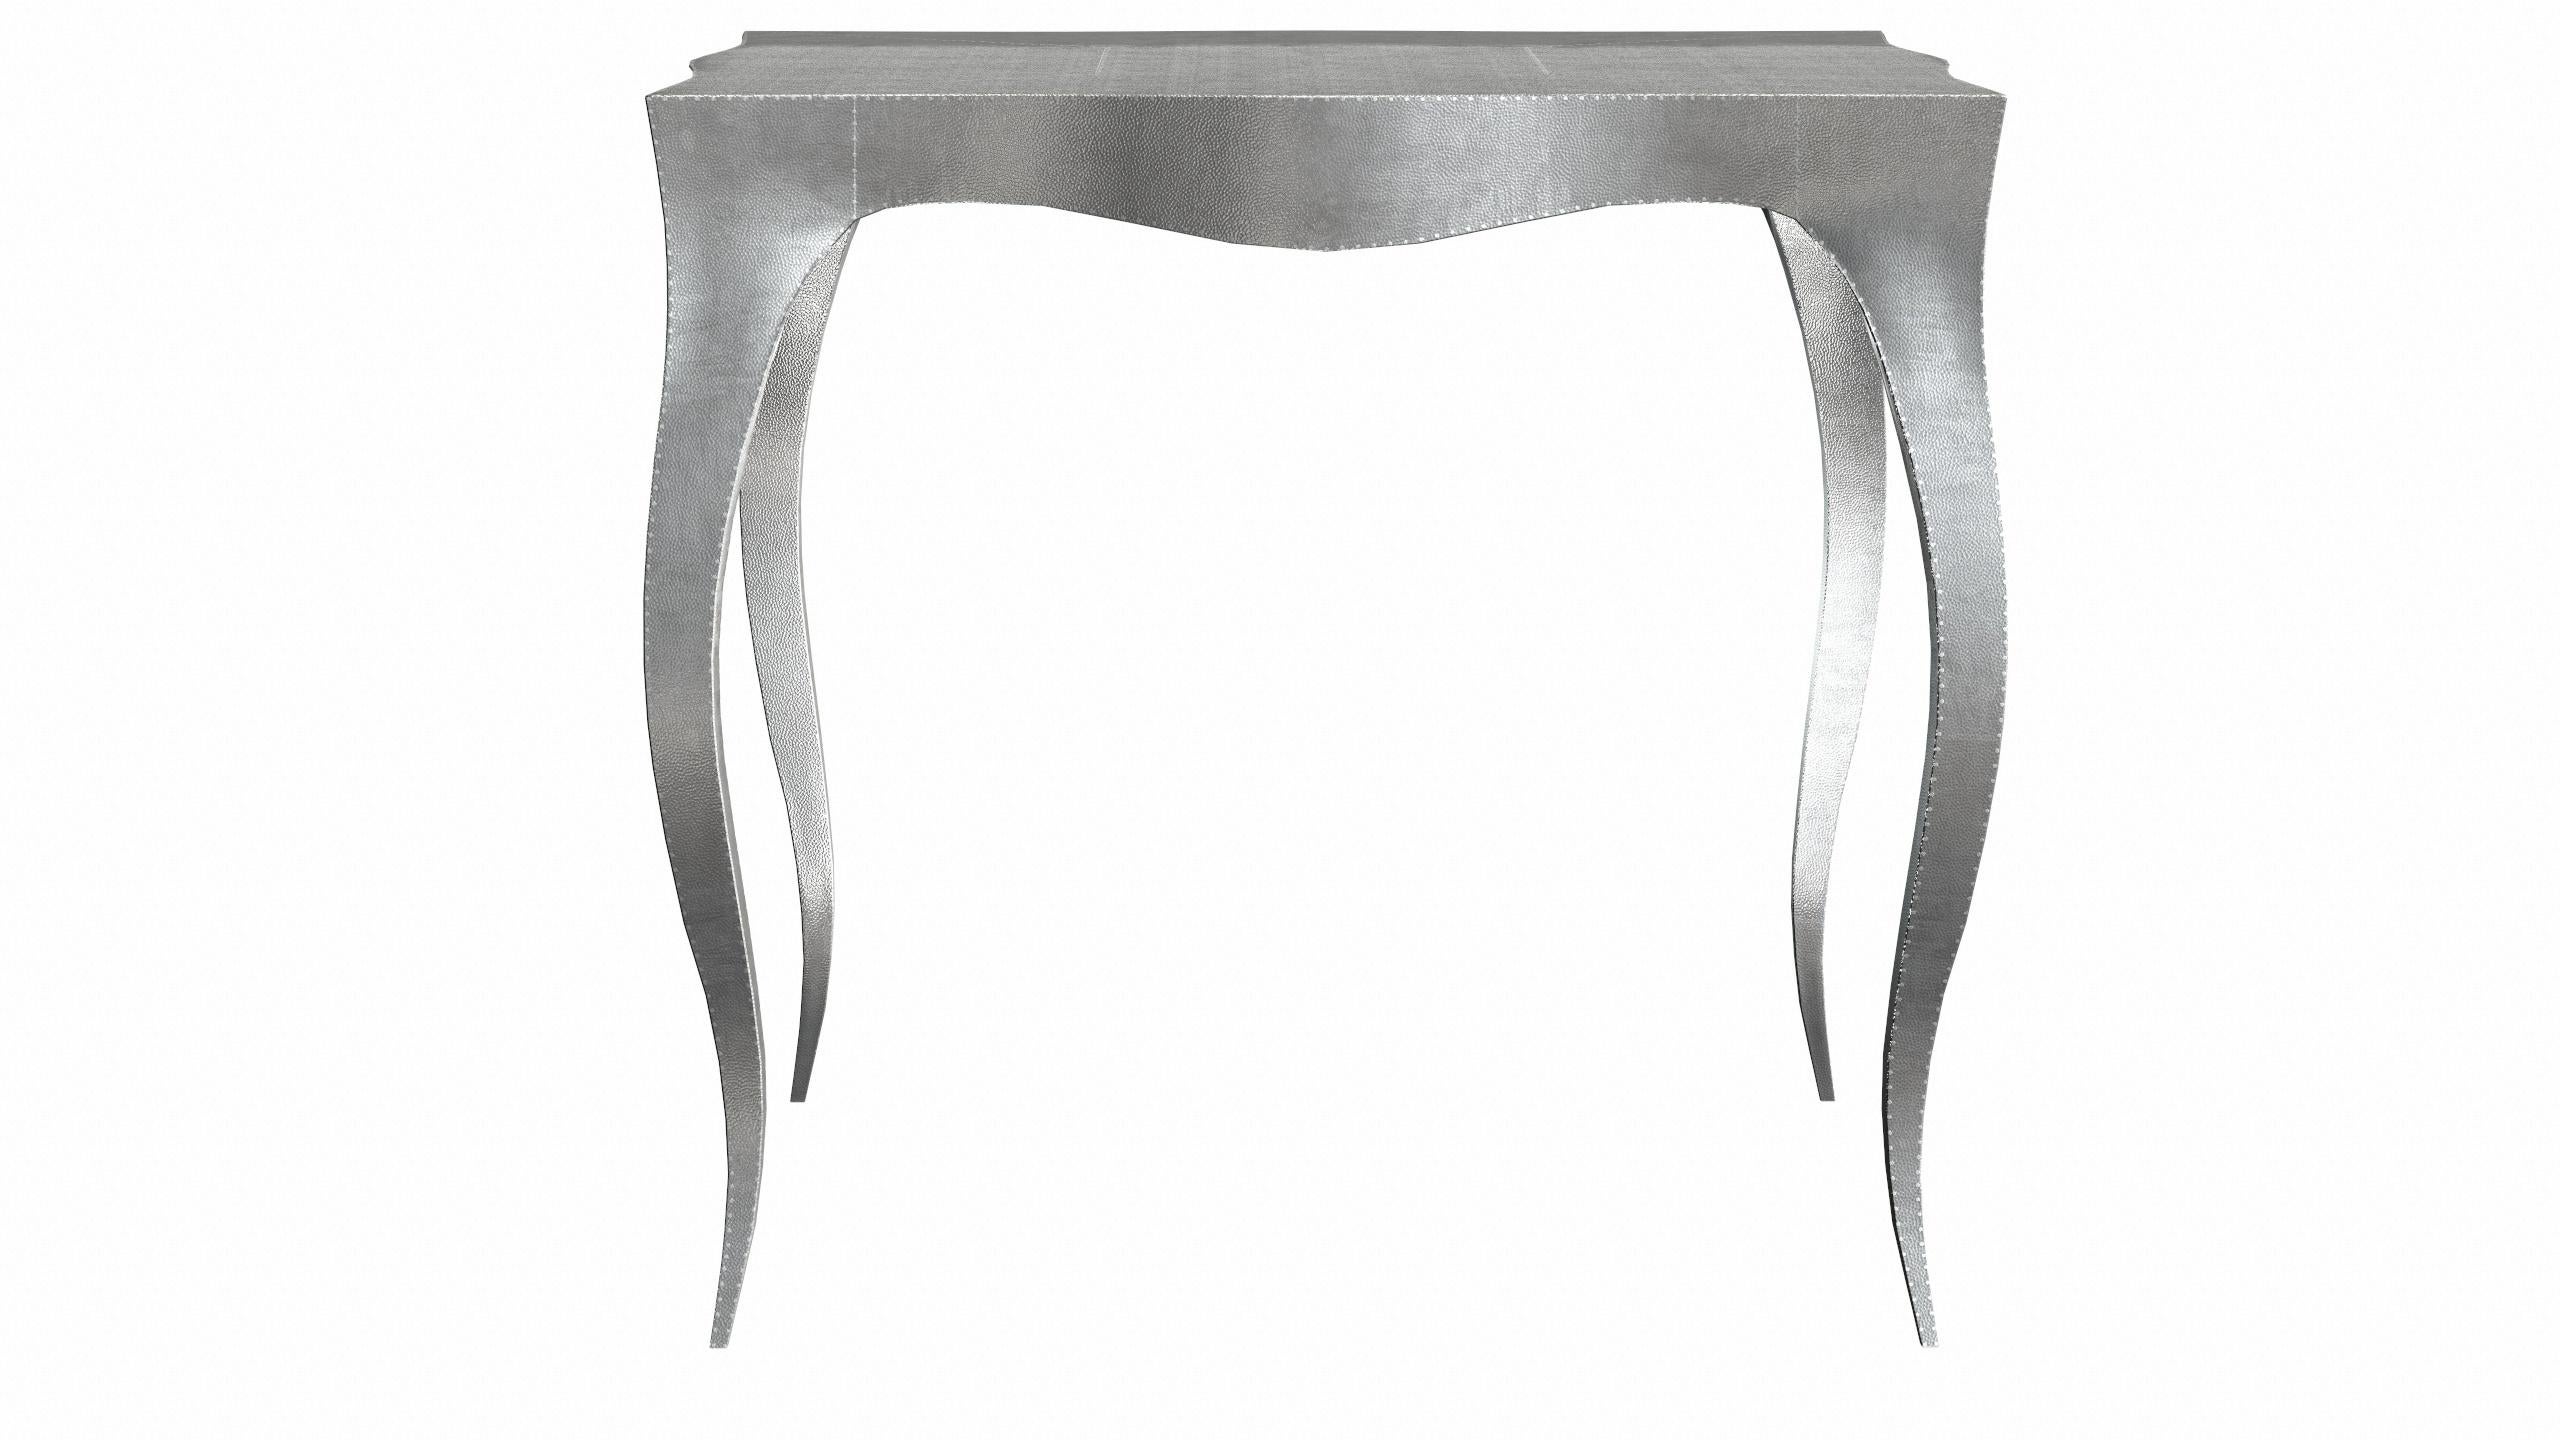 American Louise Art Deco Nesting and Stacking Tables Mid. Hammered White Bronze   For Sale